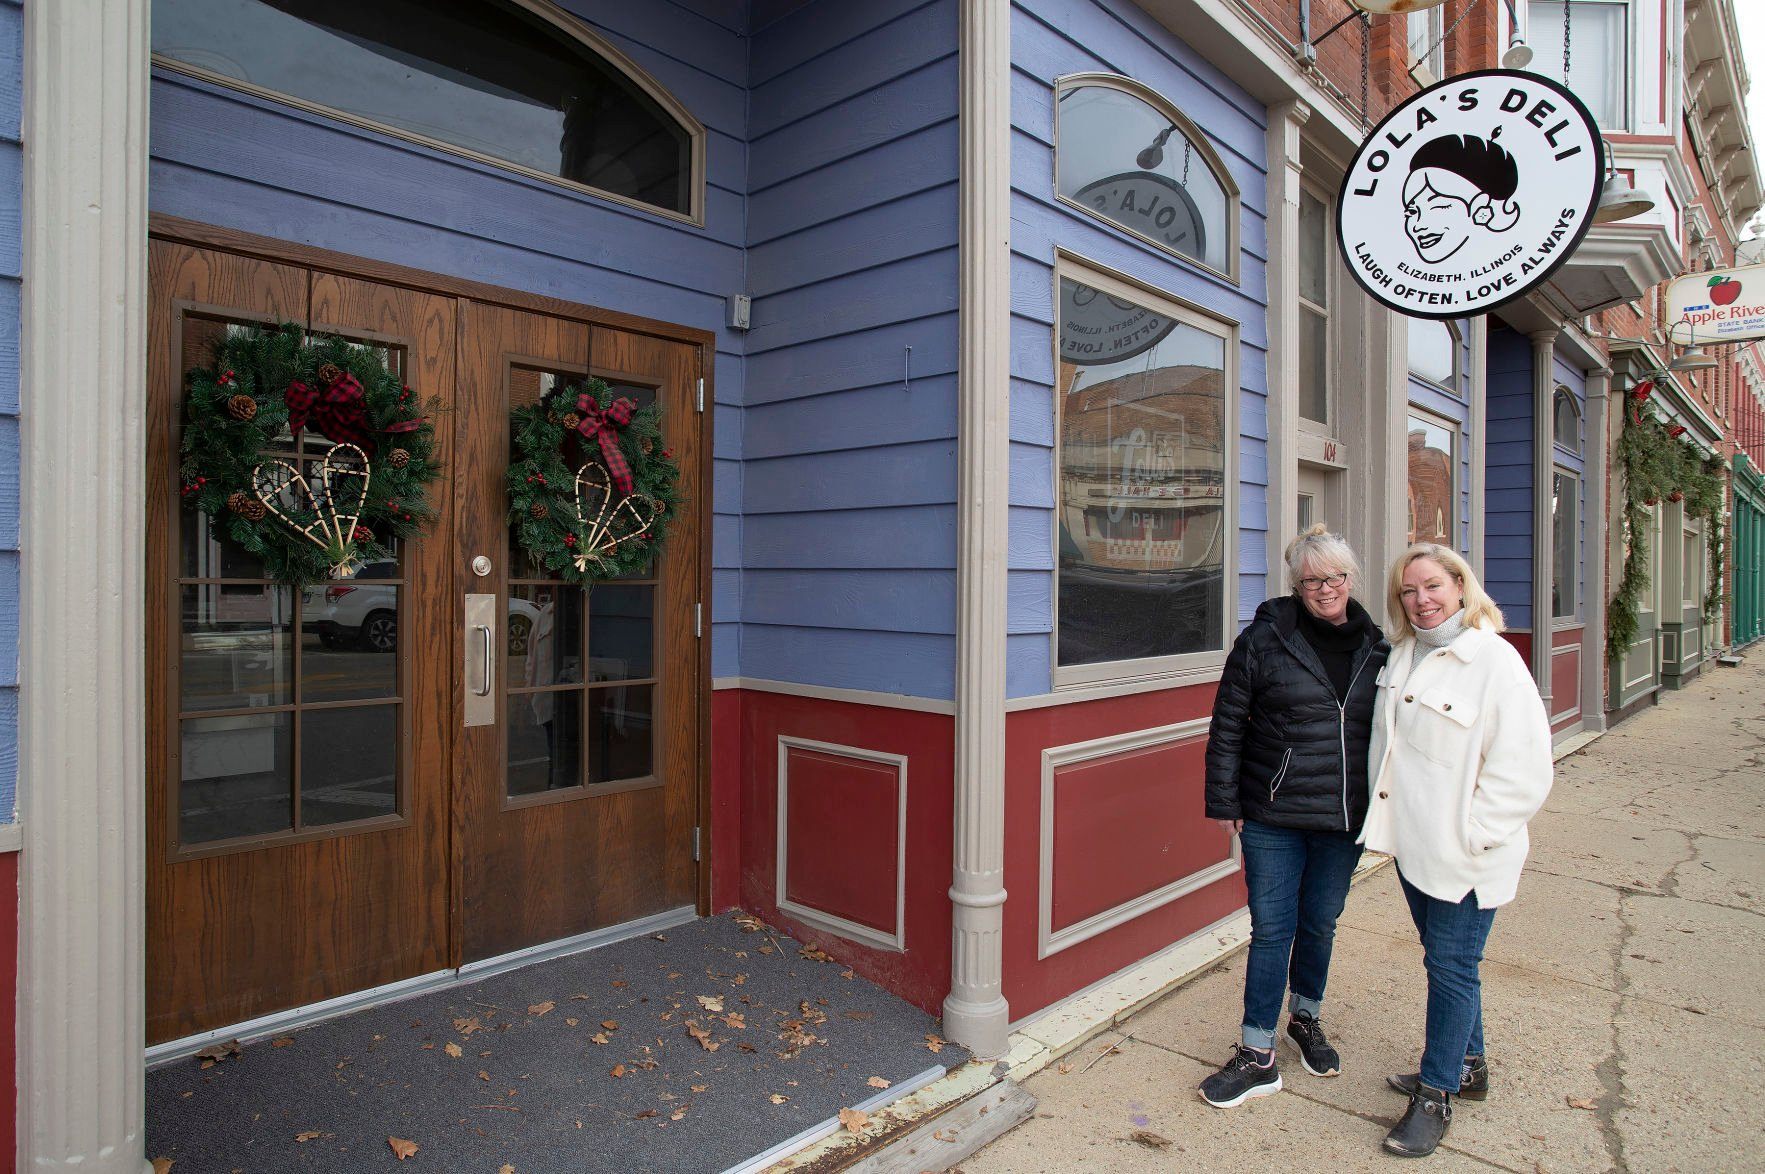 Lola’s Deli co-owners Carrie Clark (left) and Susan Hanley pose outside the site of their Elizabeth, Ill., business, set to open next month.    PHOTO CREDIT: Stephen Gassman, Telegraph Herald